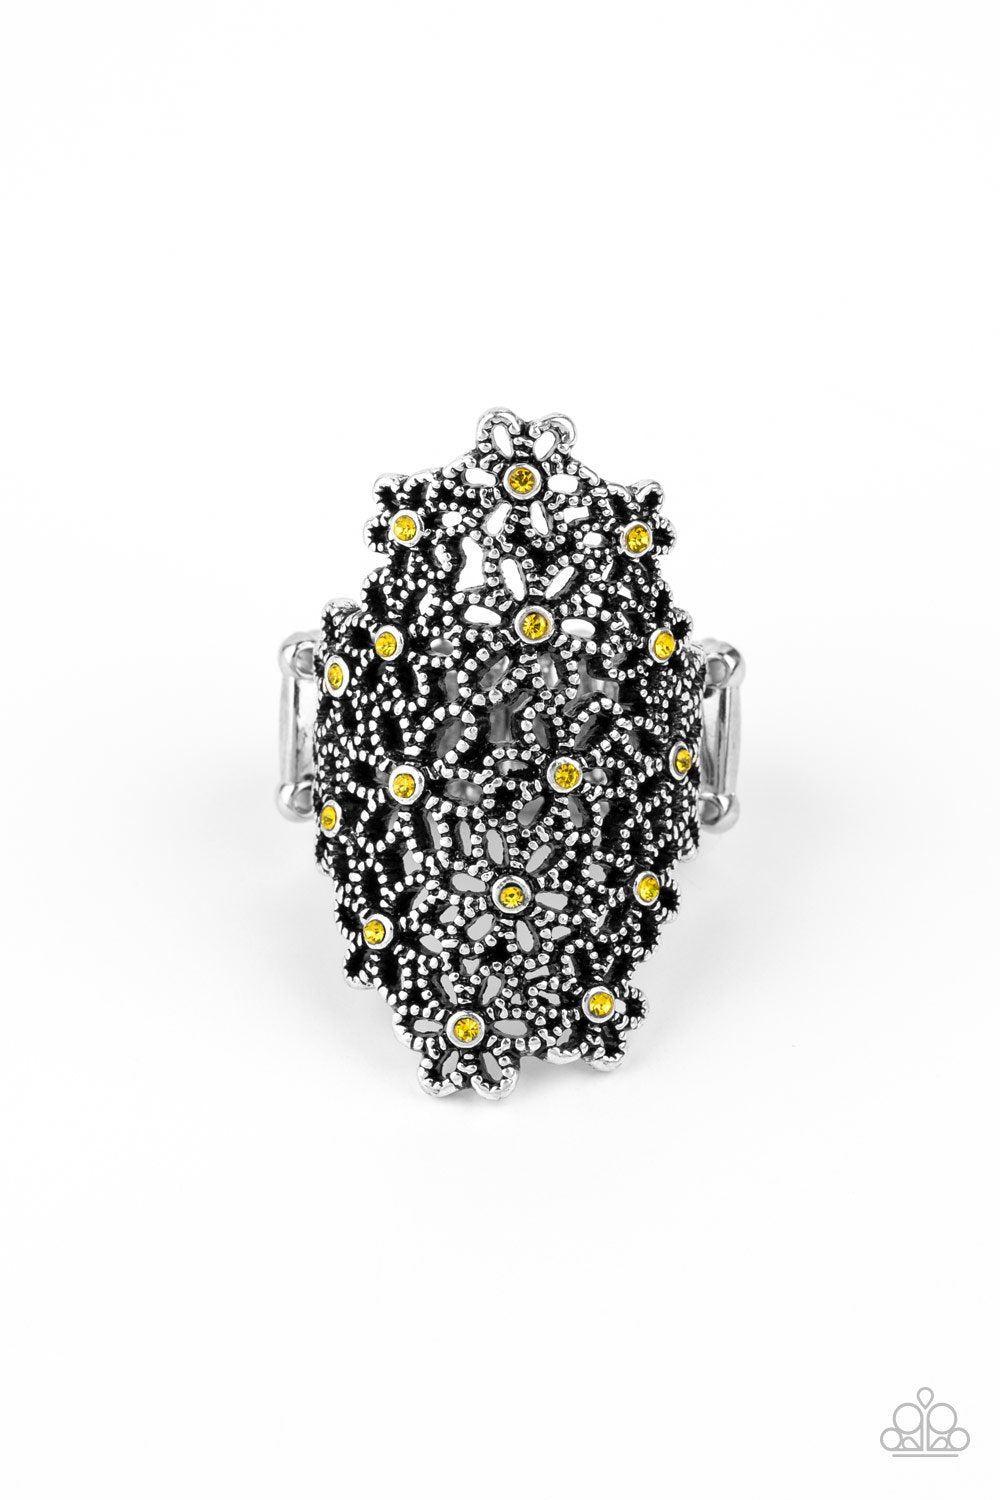 "You're a Sunflower" - Yellow #3015 - Paparazzi Accessories